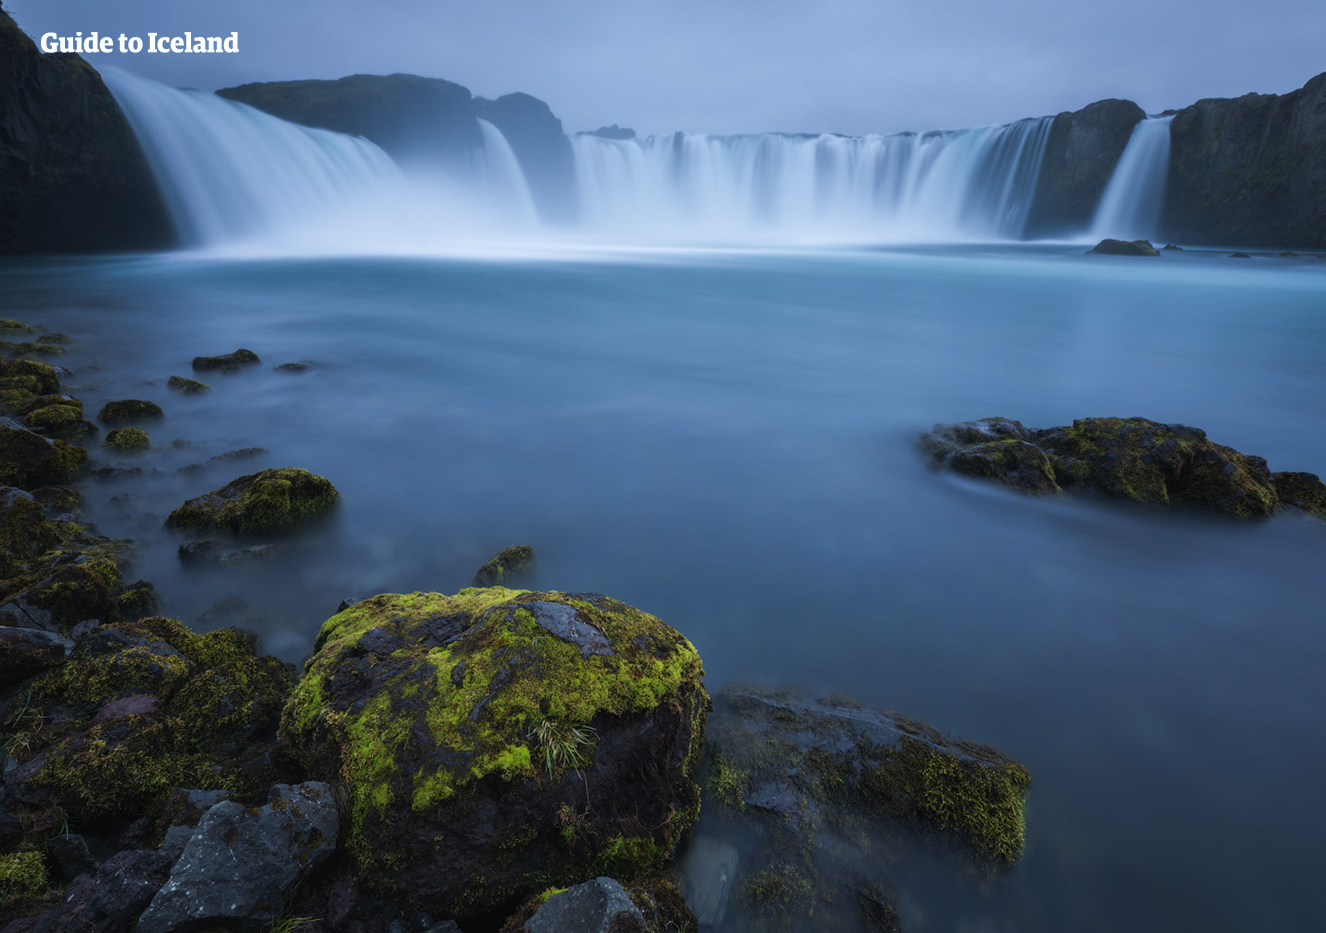 Goðafoss waterfall is located in North Iceland.